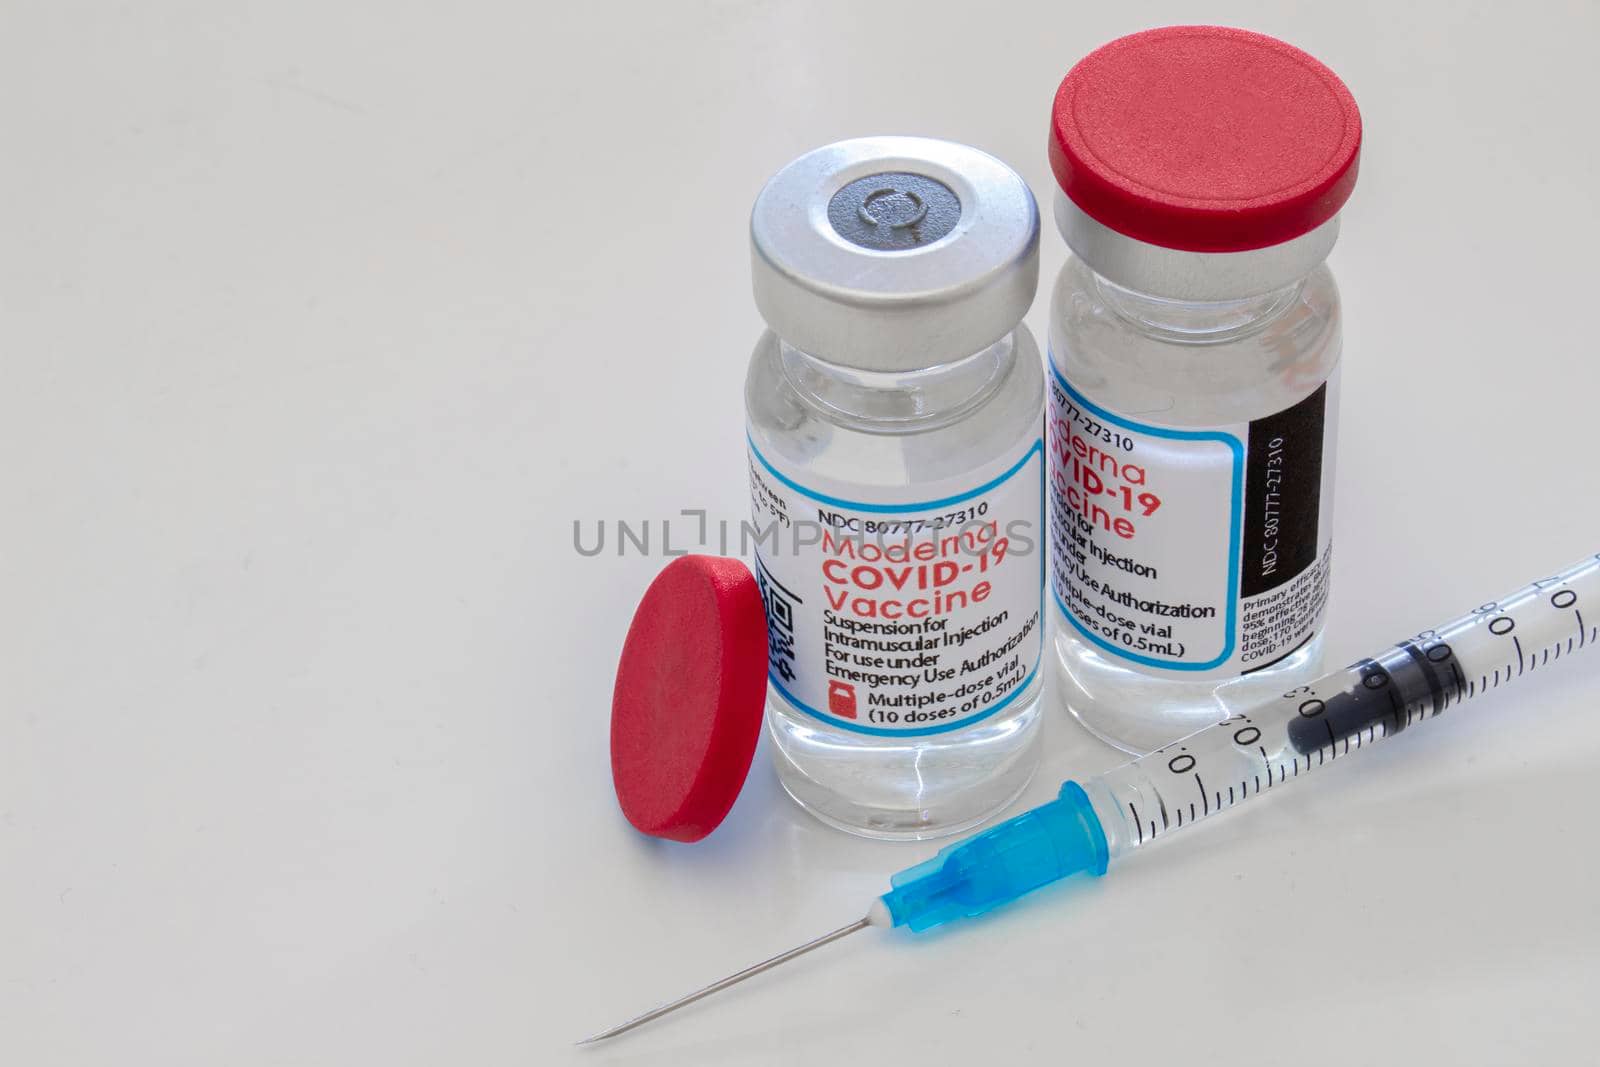 Calgary, Alberta, Canada. April 16, 2021. A couple of Moderna Covid-19 vaccine vials bottles and an injection syringe on a clear table. by oasisamuel